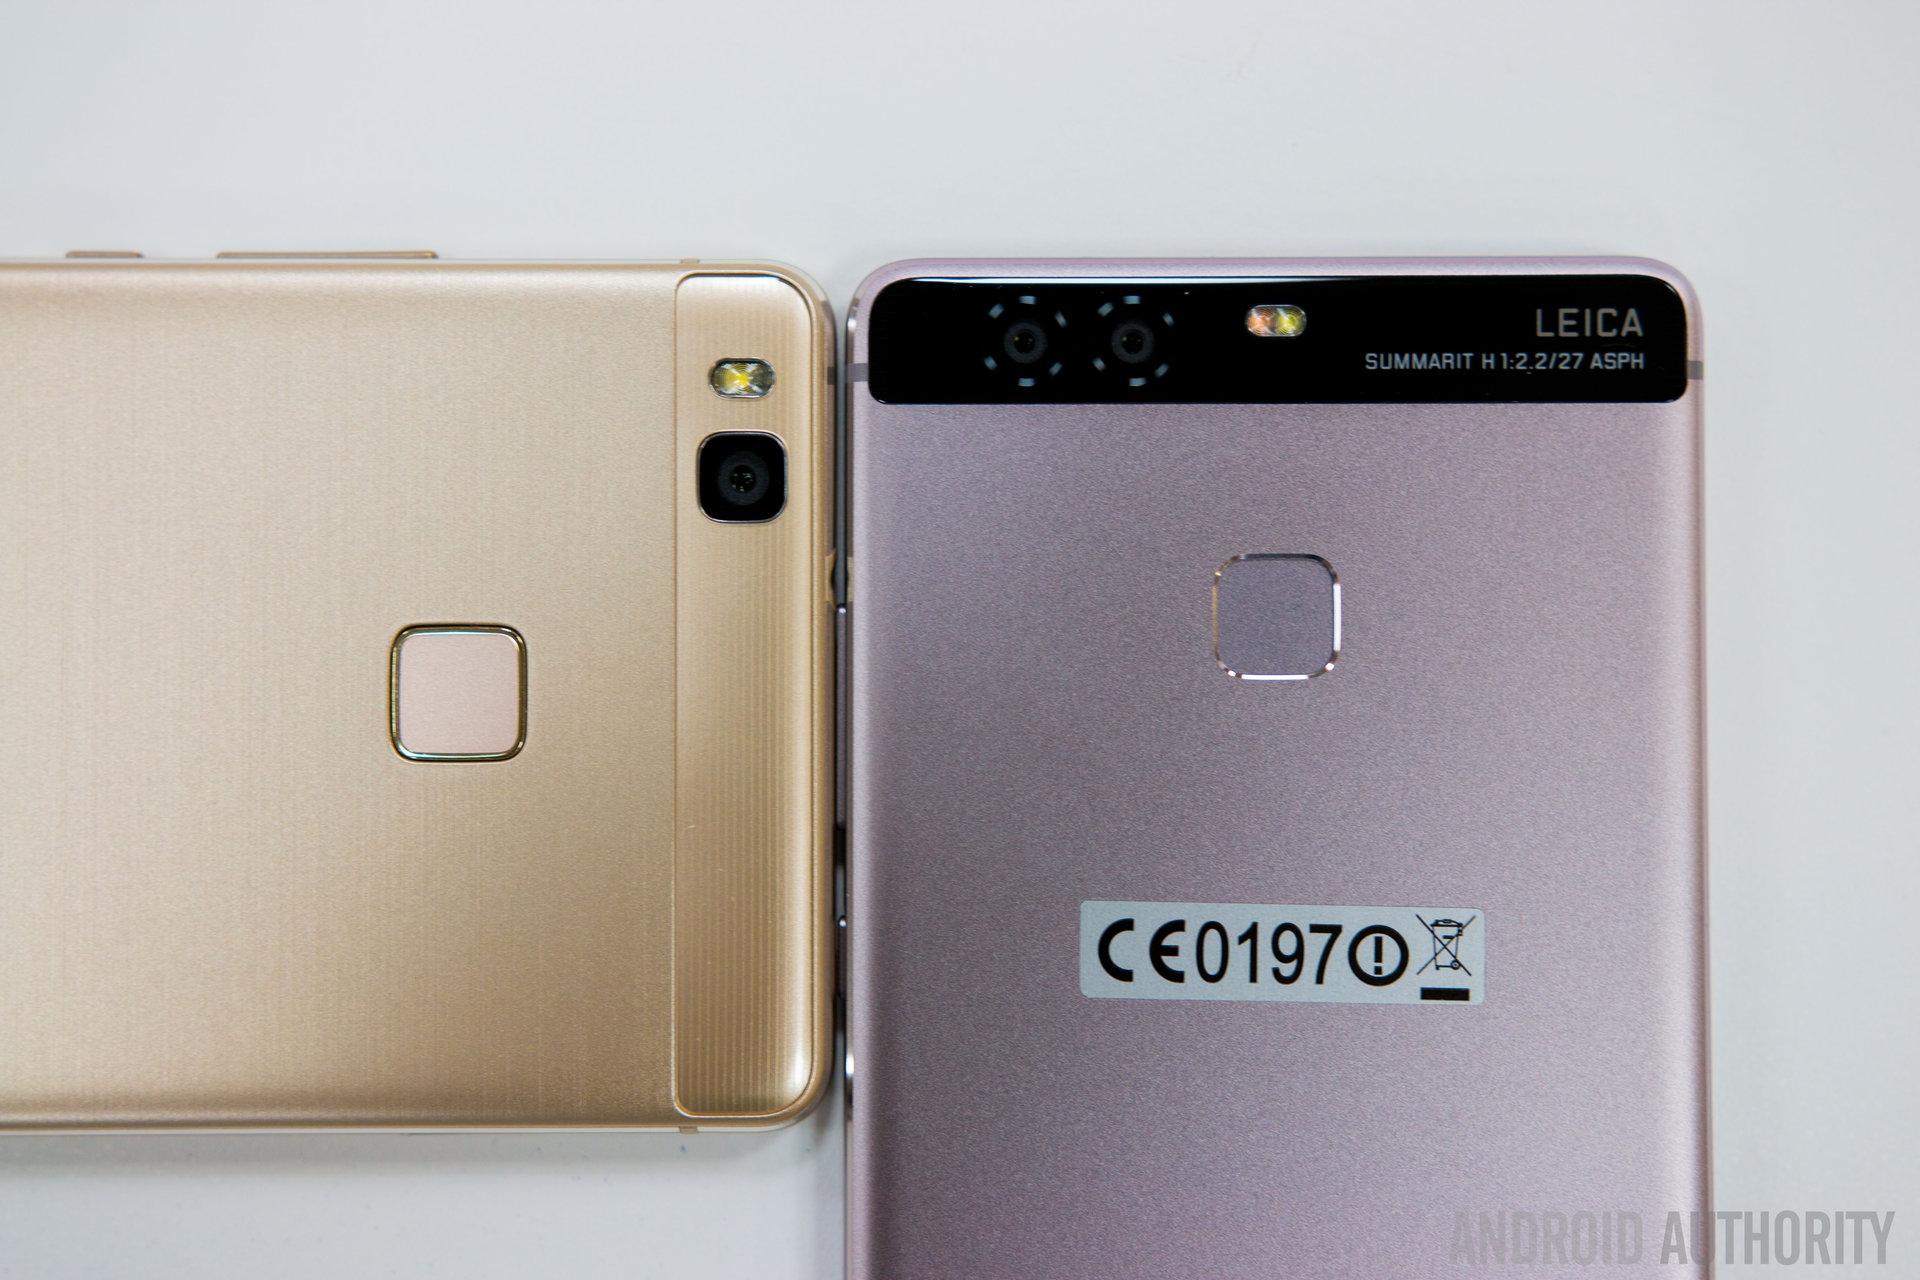 Huawei P9 Lite vs Huawei P9 quick look - Android Authority